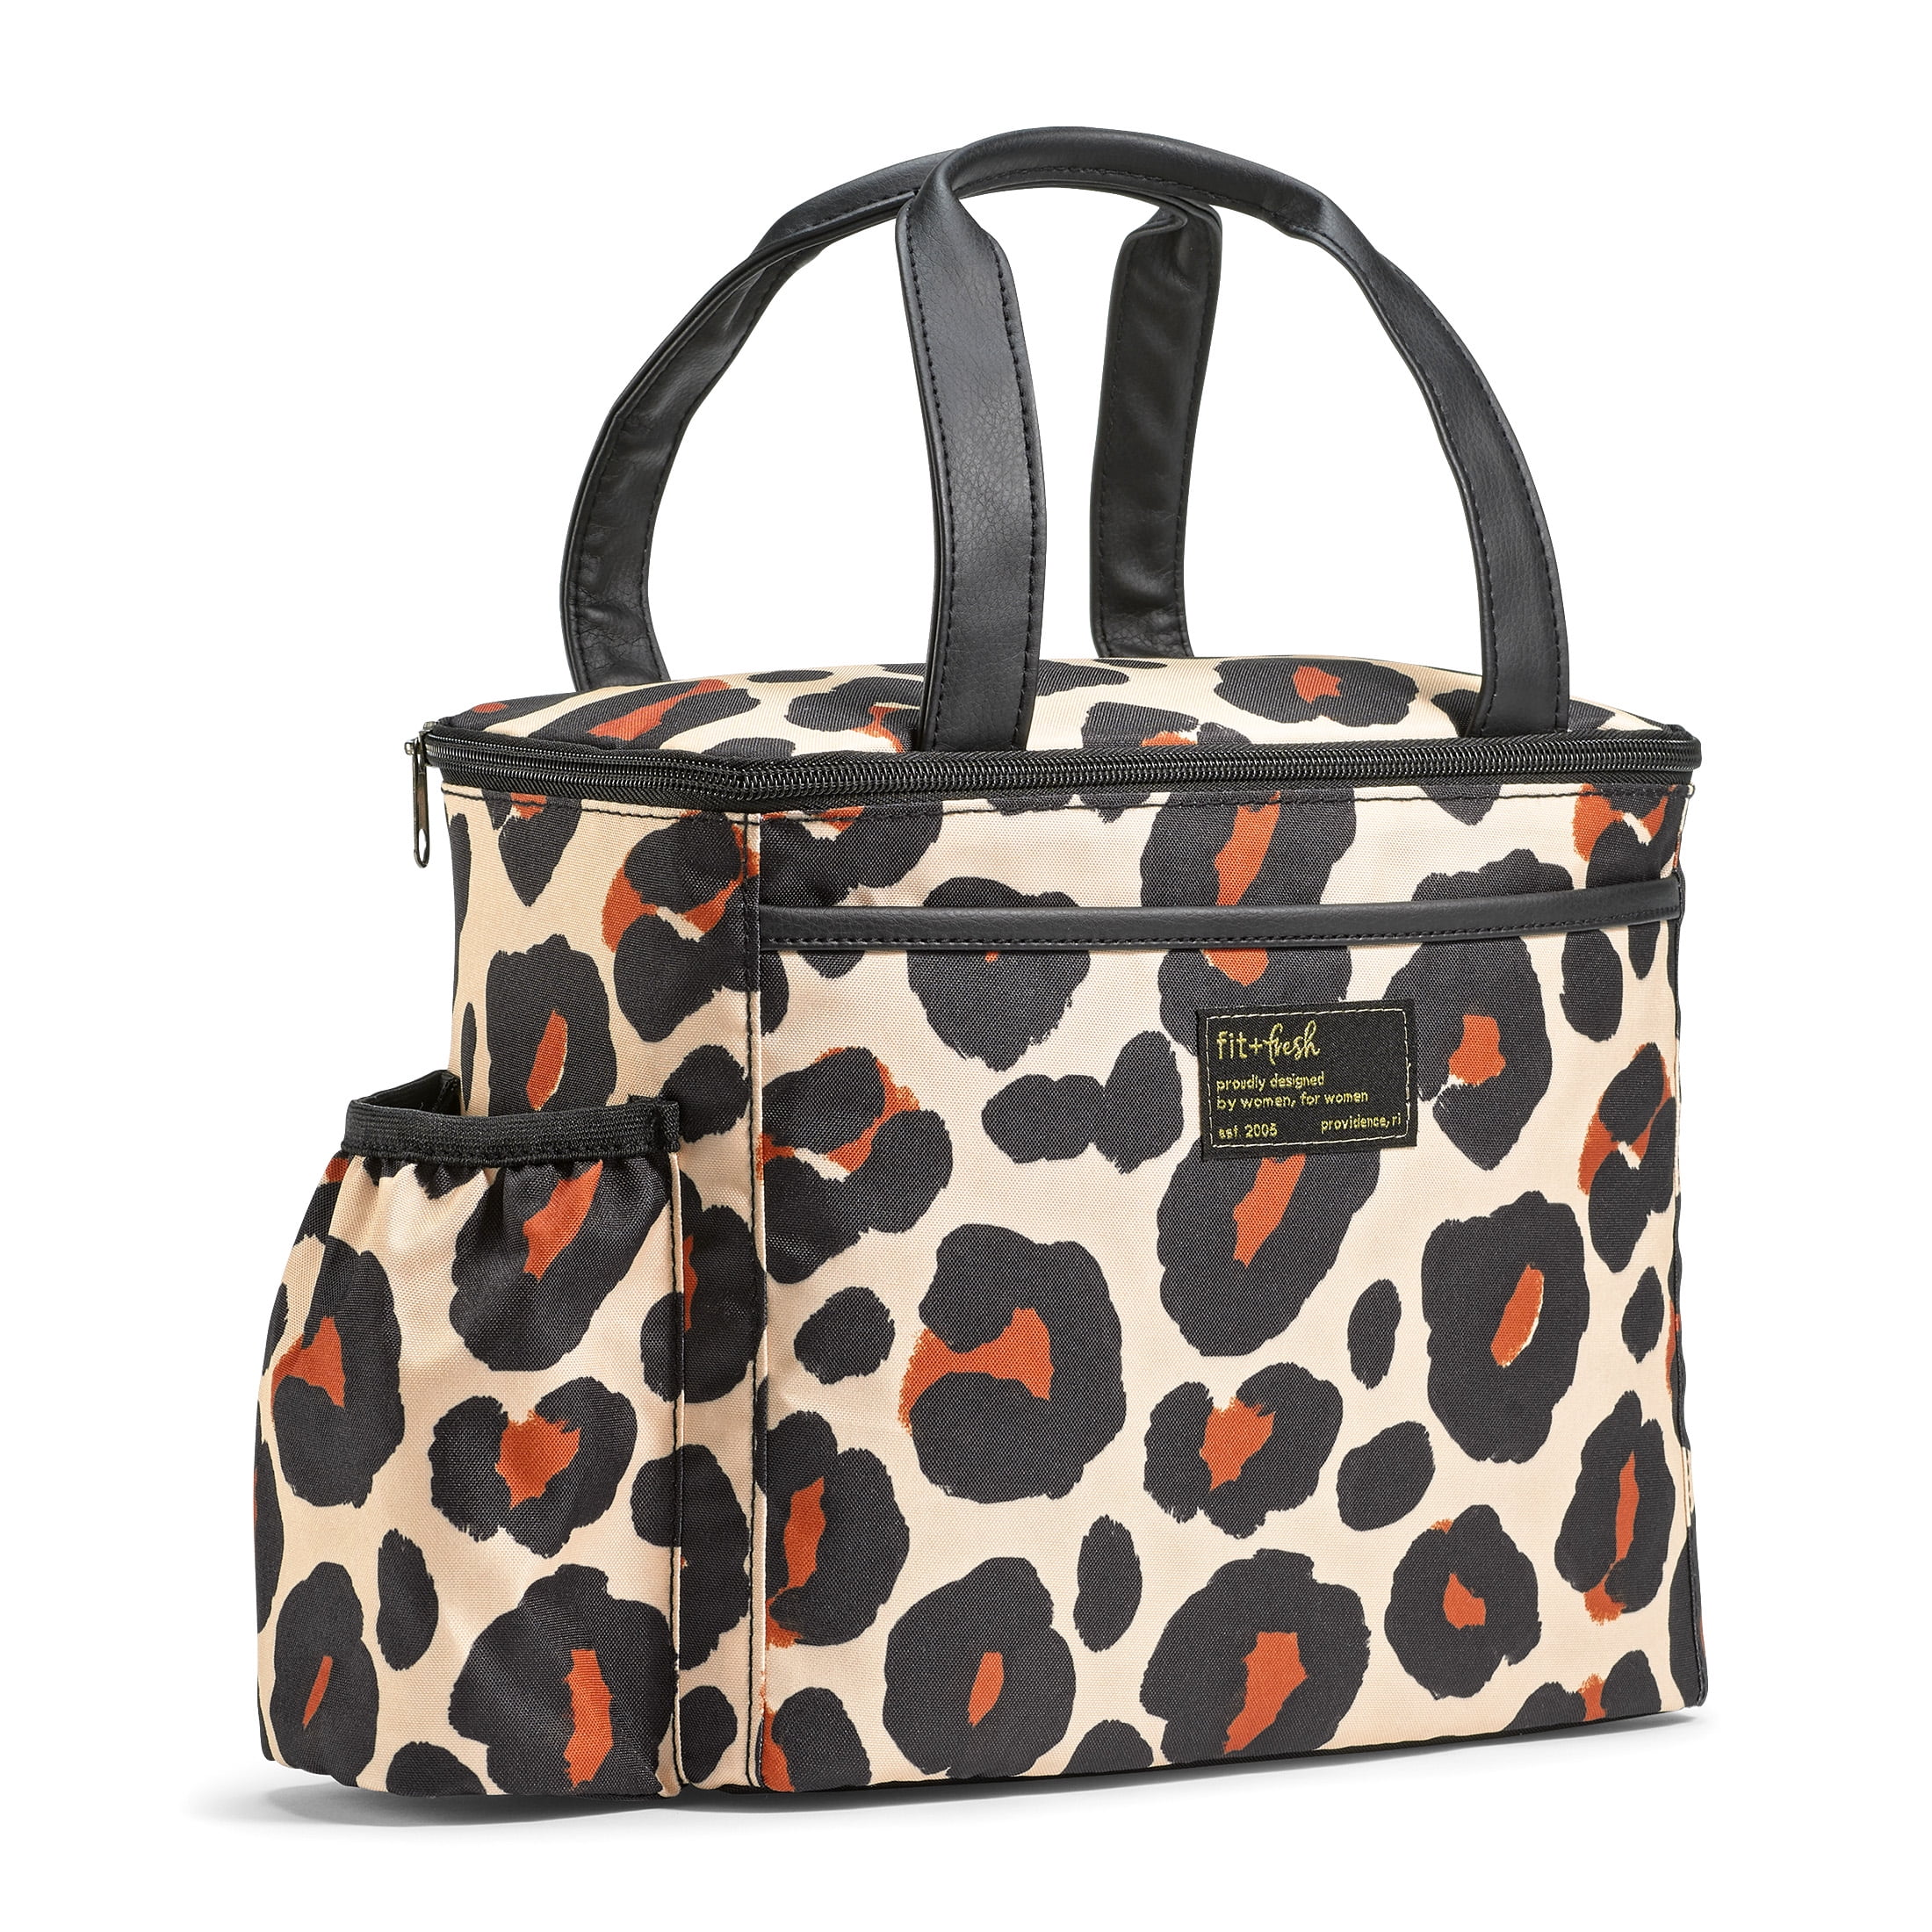  MIER Leopard Lunch Bag for Womens Ladies-Insulated Adult Lunch  Box Stylish Cute Lunch Totes with Shoulder Strap Portable Fashion Lunch  Cooler Bag: Home & Kitchen